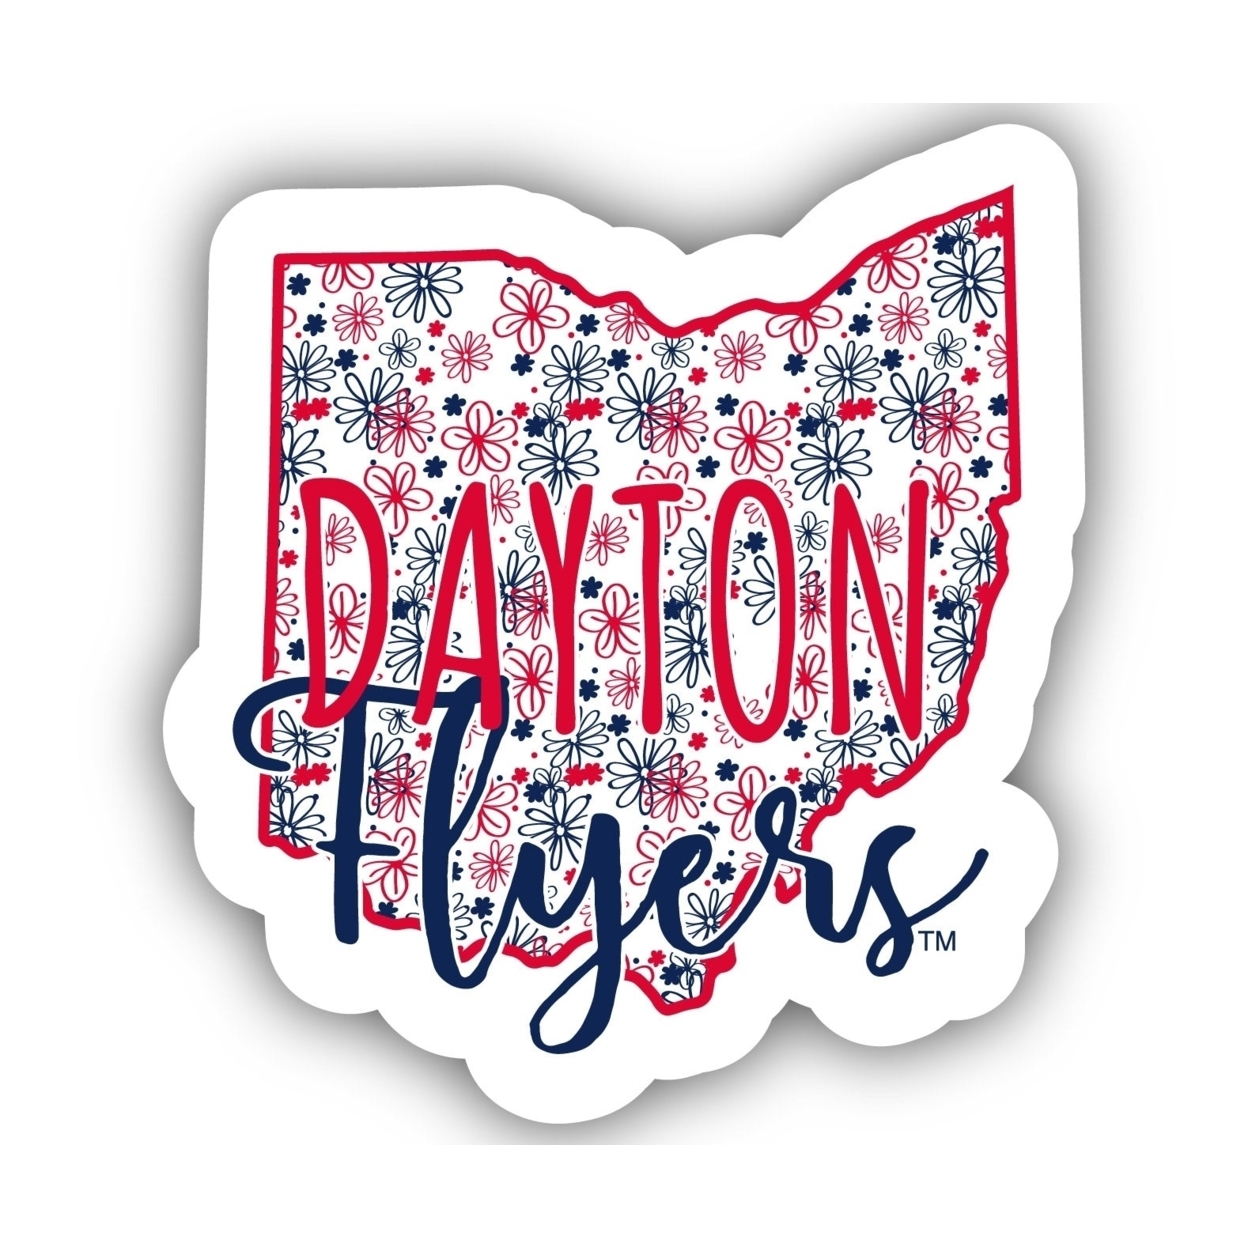 Dayton Flyers Floral State Die Cut Decal 2-Inch